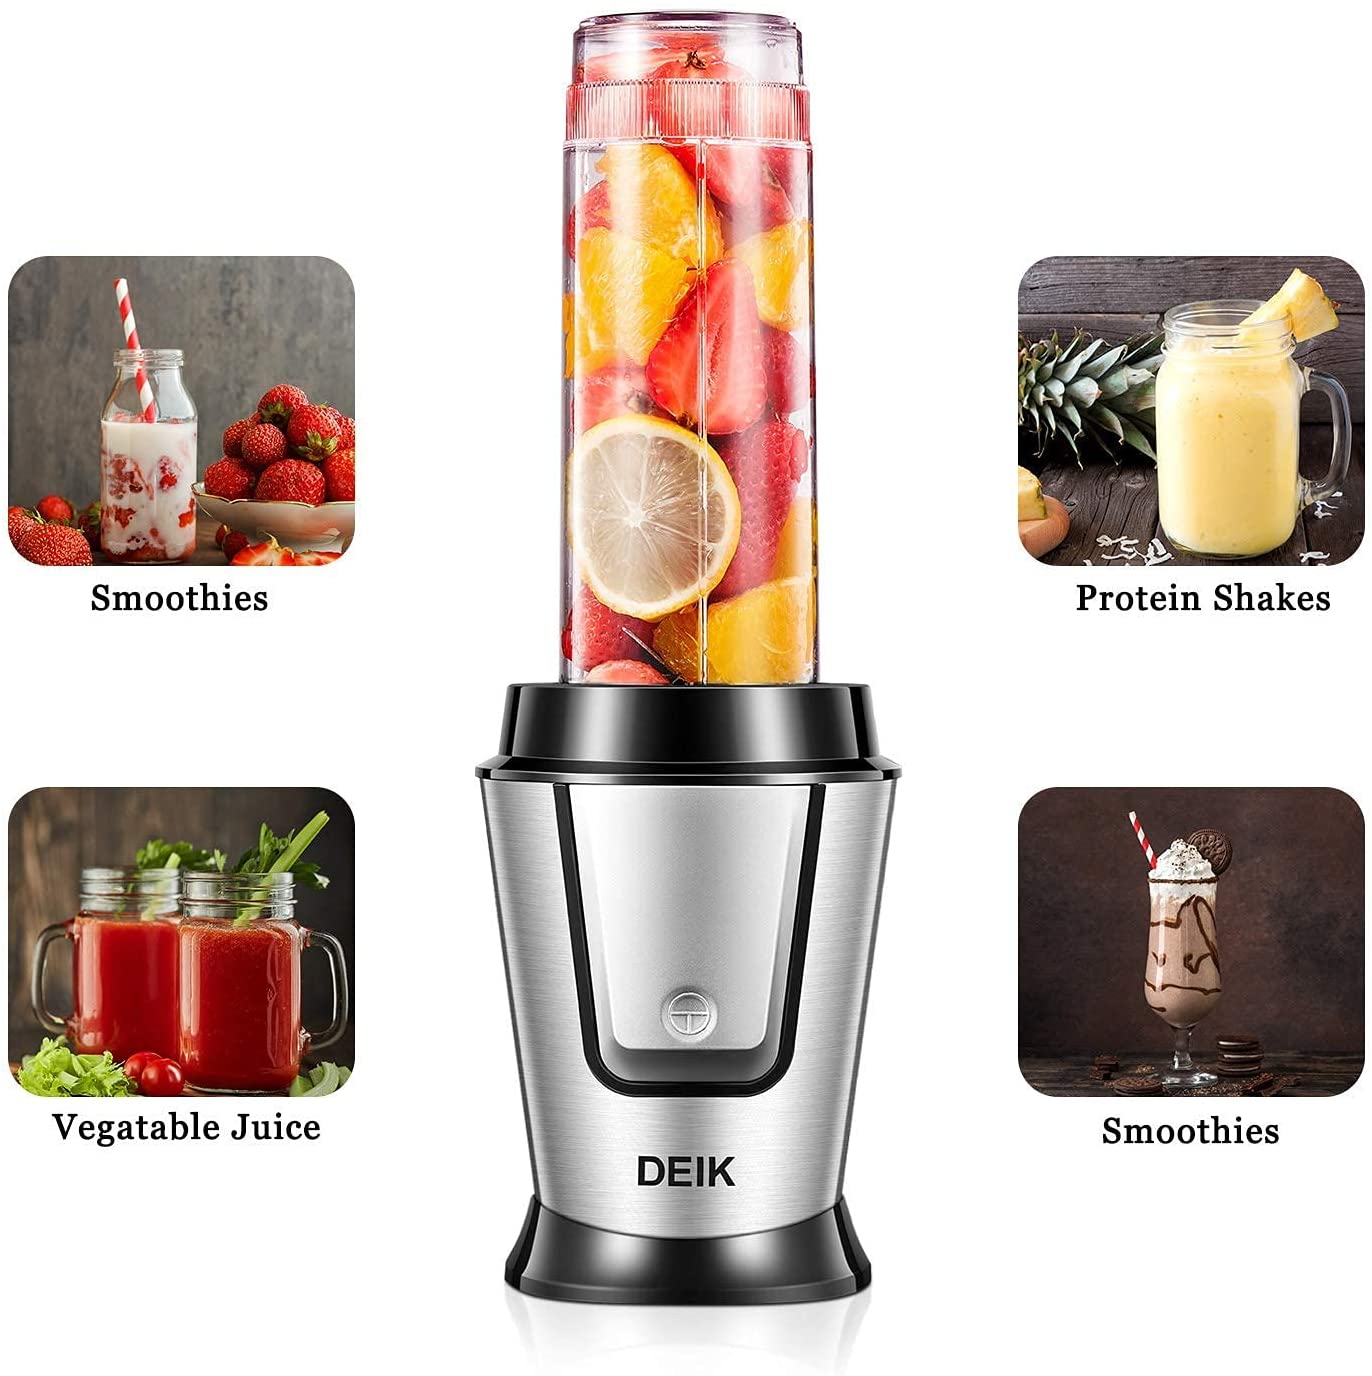 DEIK | Personal Smoothie Blender, Bullet Blender for Shakes and Smoothies, Single Serve Mini Blender for Kitchen, Smoothies, Protein Shakes, Vegetable Juice, Smoothies